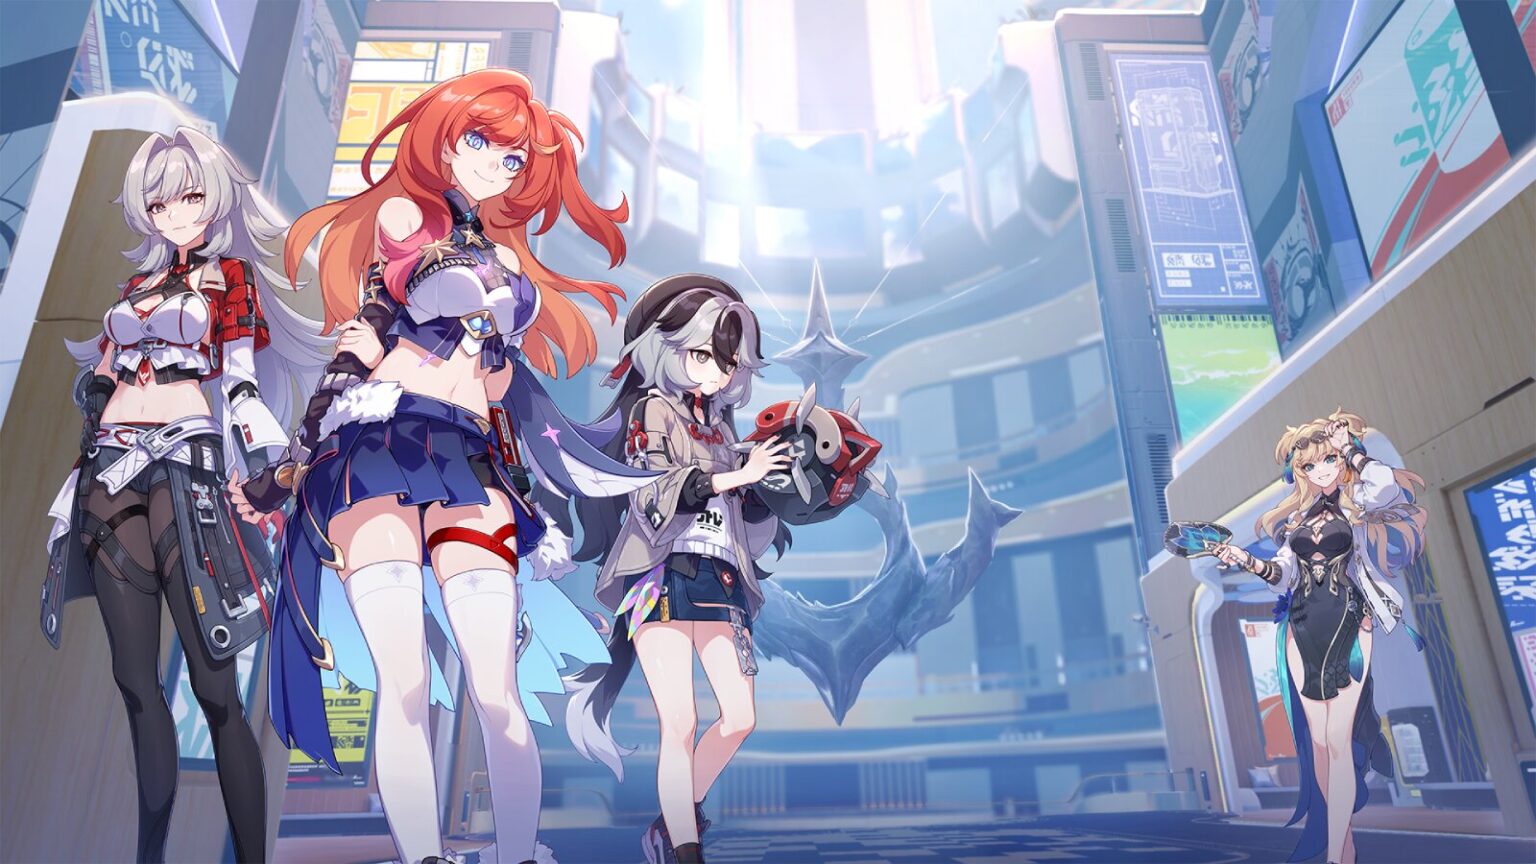 Four anime characters in a futuristic city from a gacha mobile game